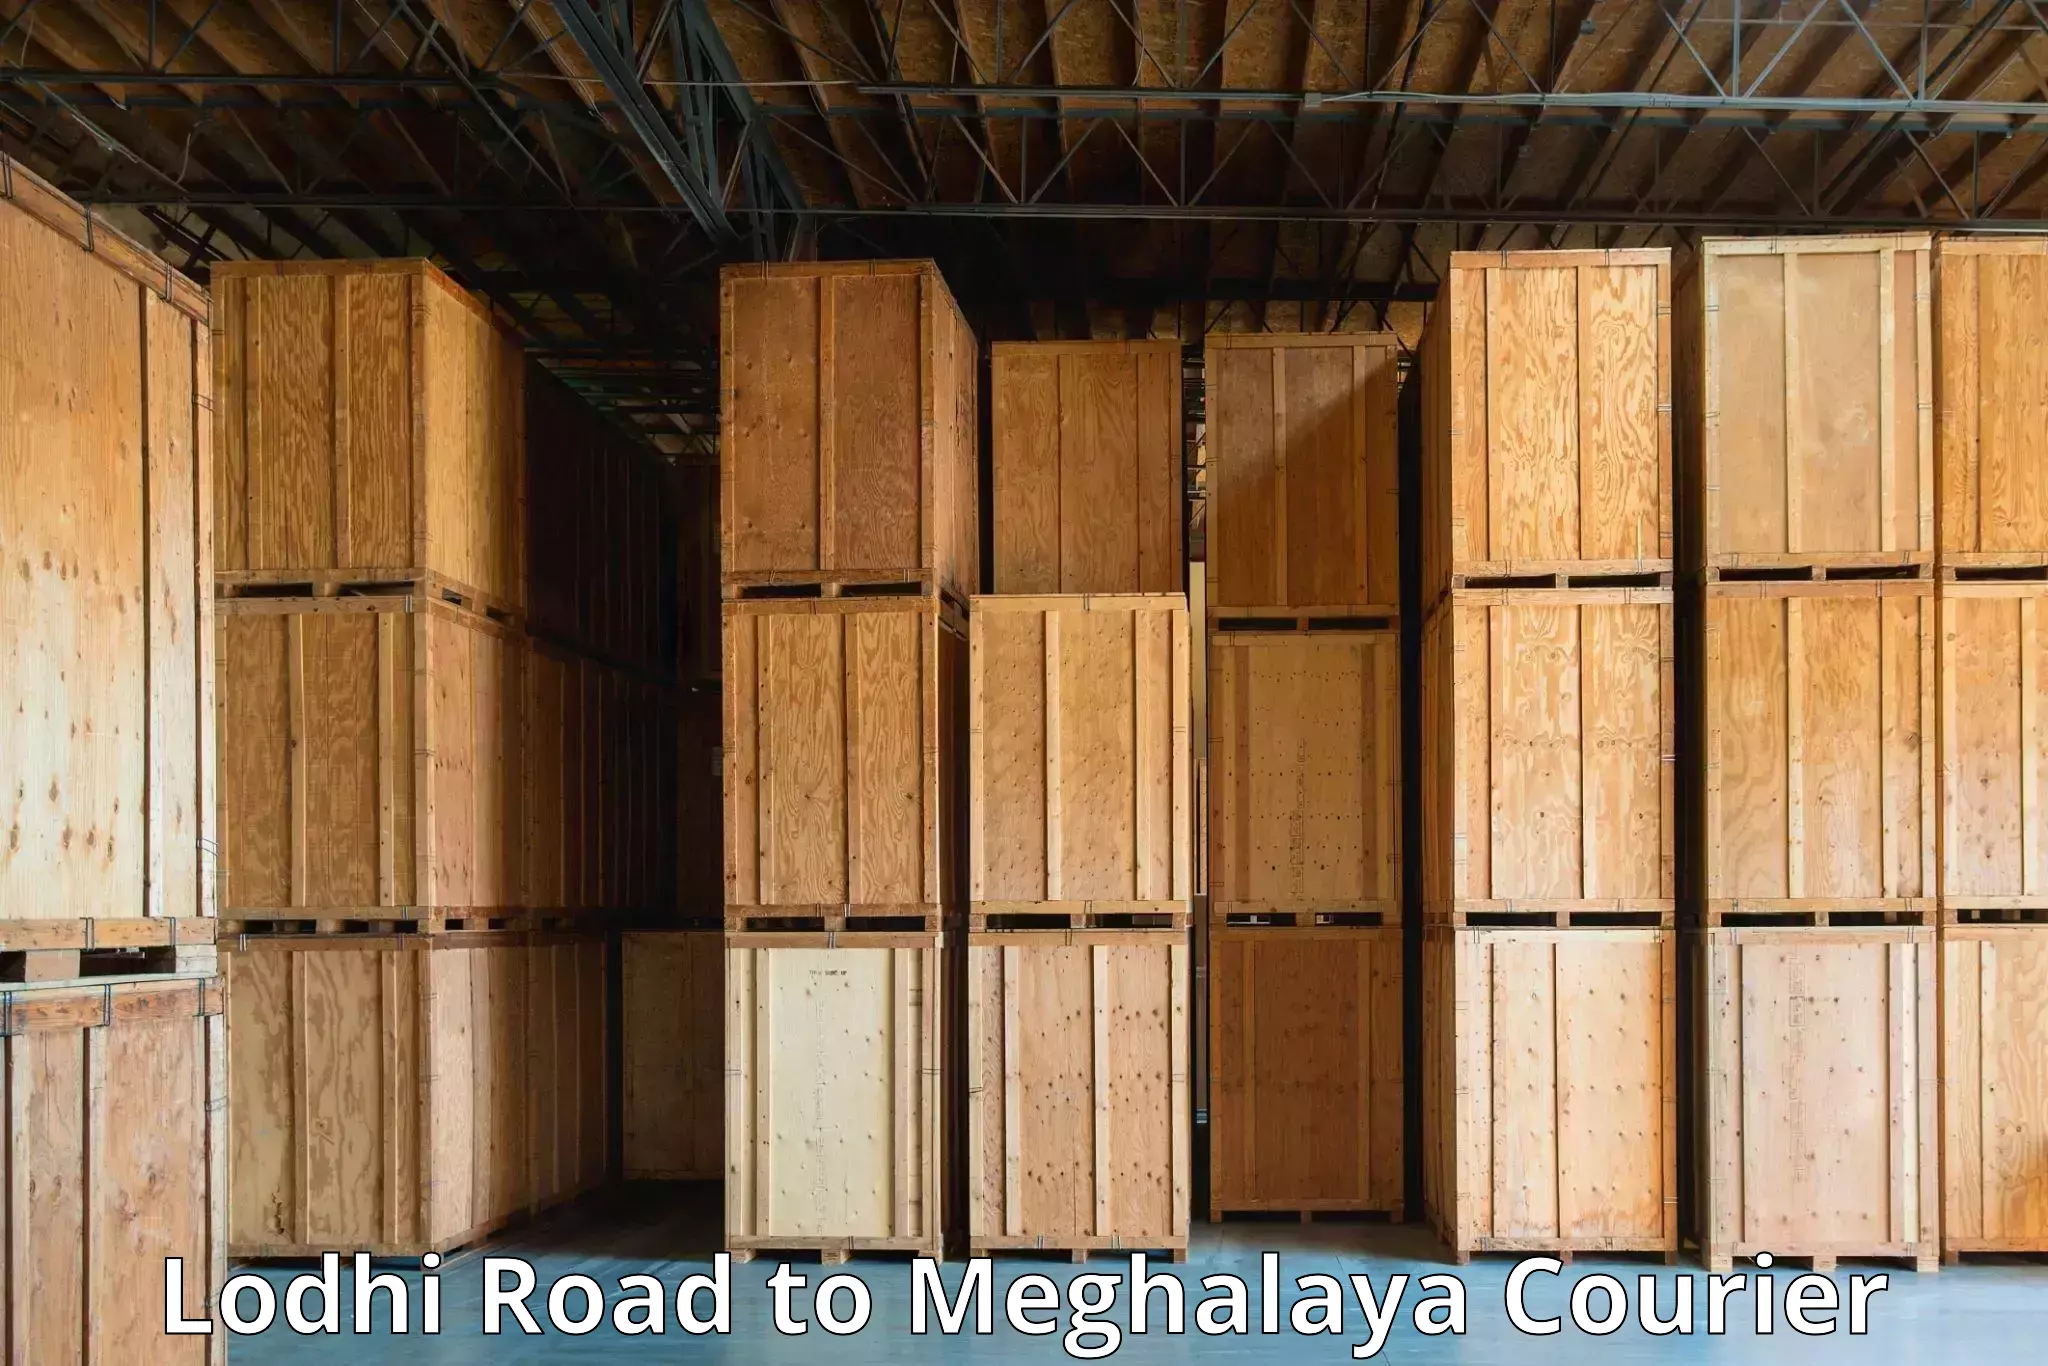 Pharmaceutical courier Lodhi Road to Meghalaya